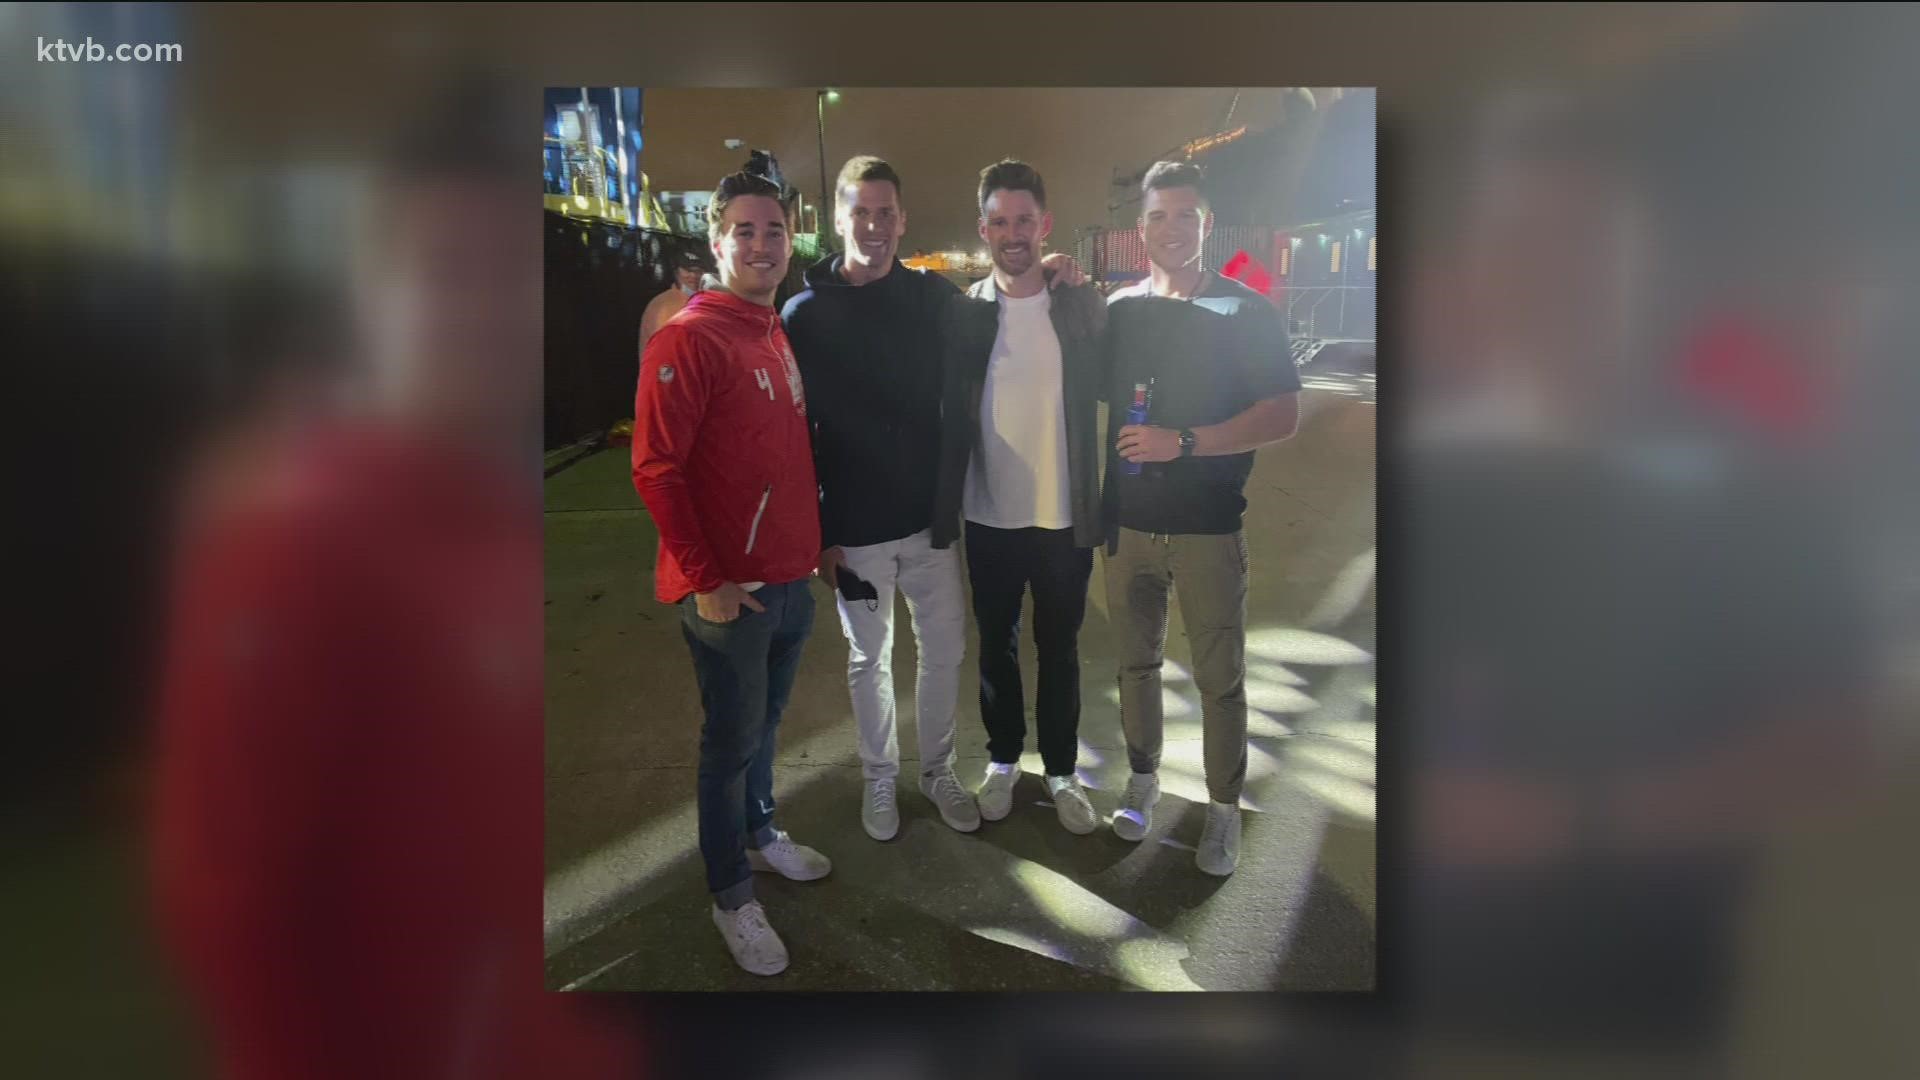 Maclaine Griffin's brother is Tom Brady's back up and after the Super Bowl, he got a chance to meet the GOAT.